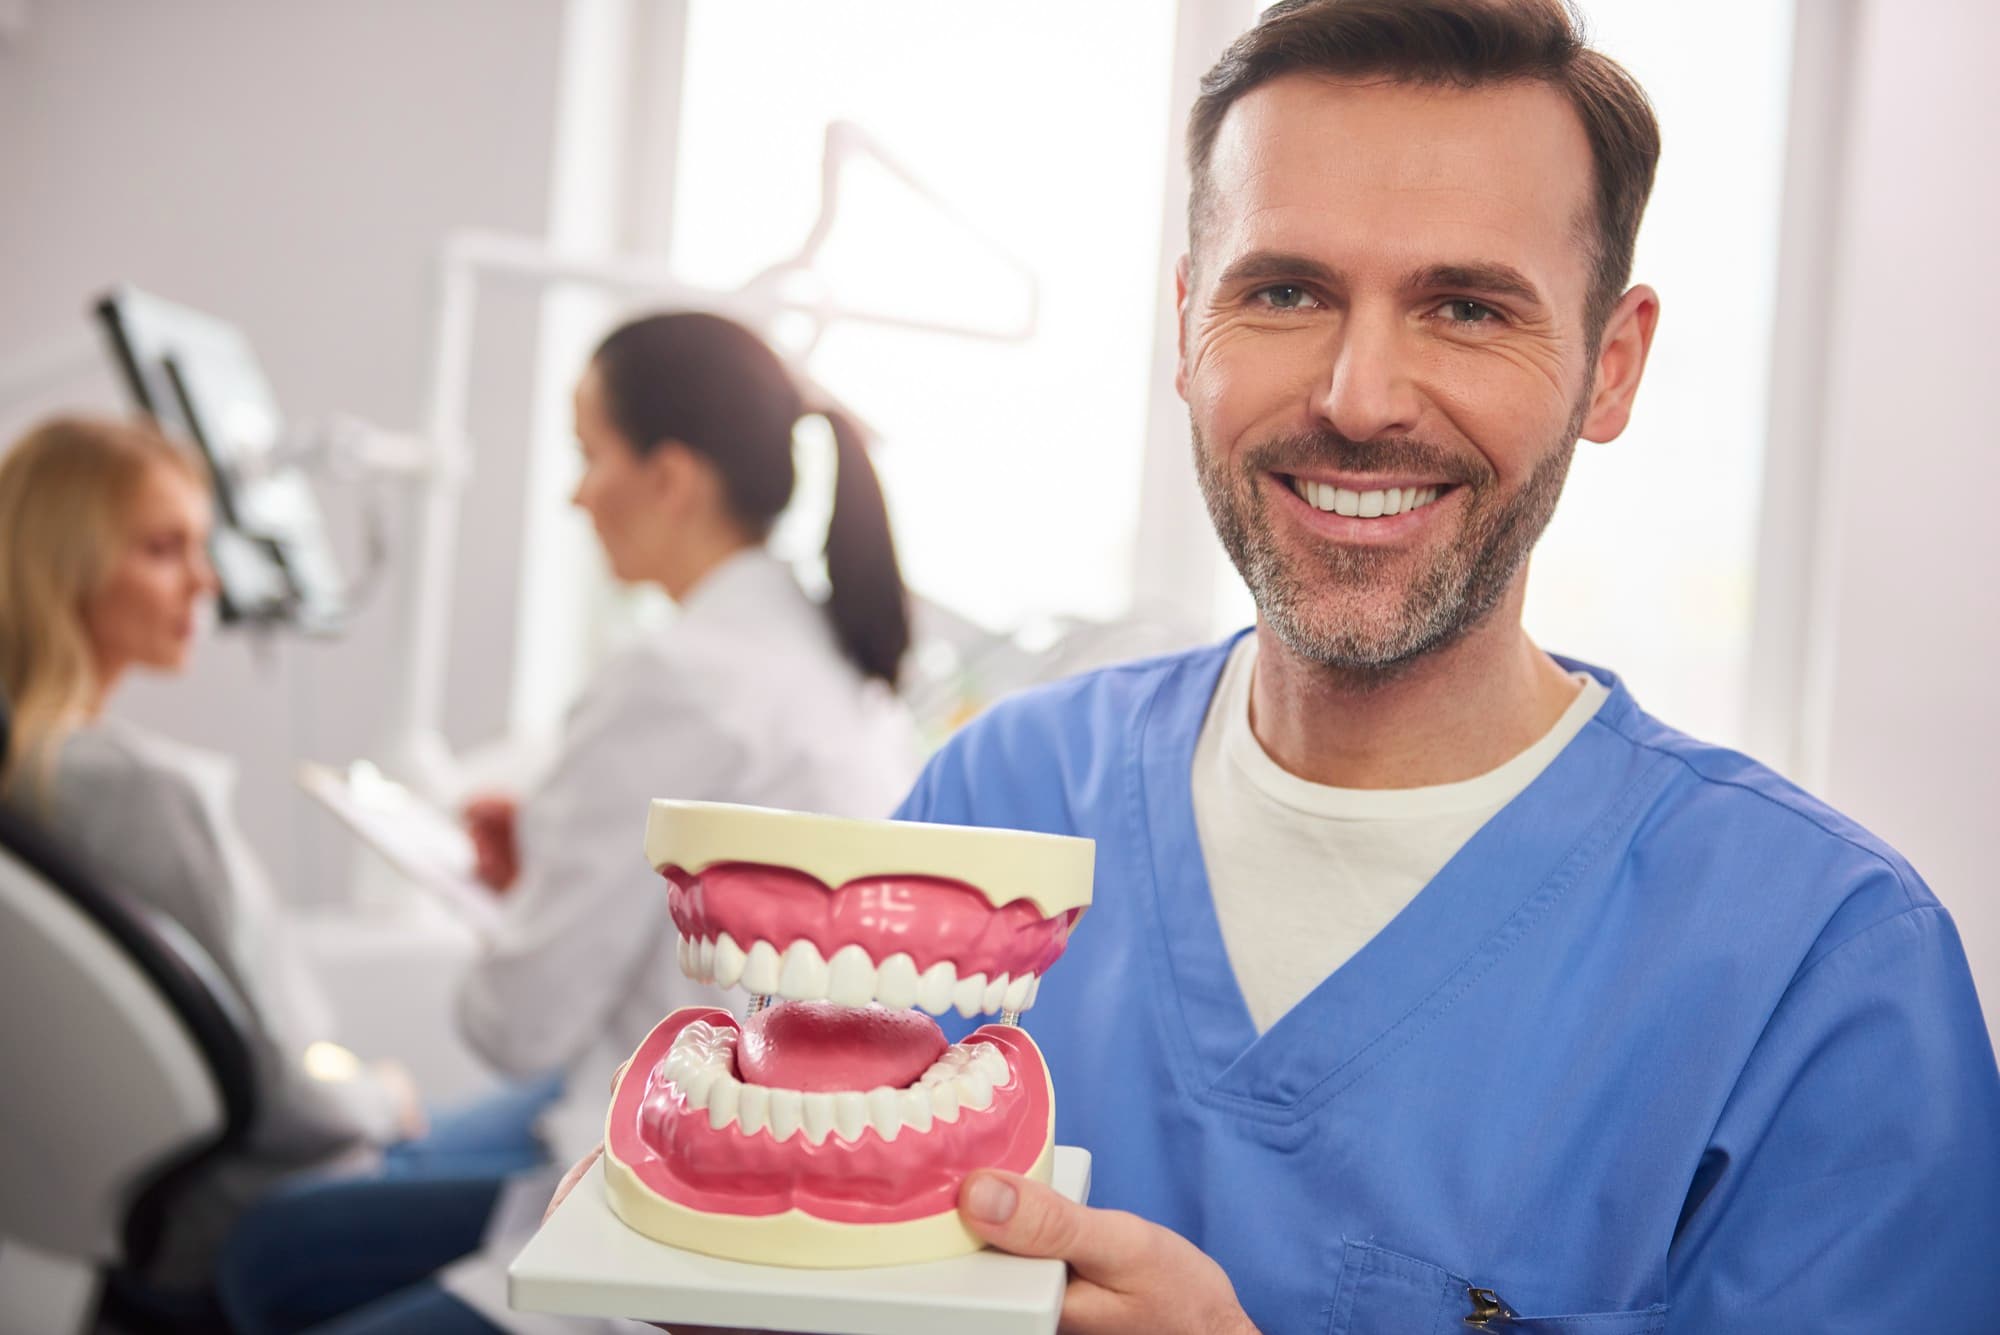 Dentures : What do I need to know